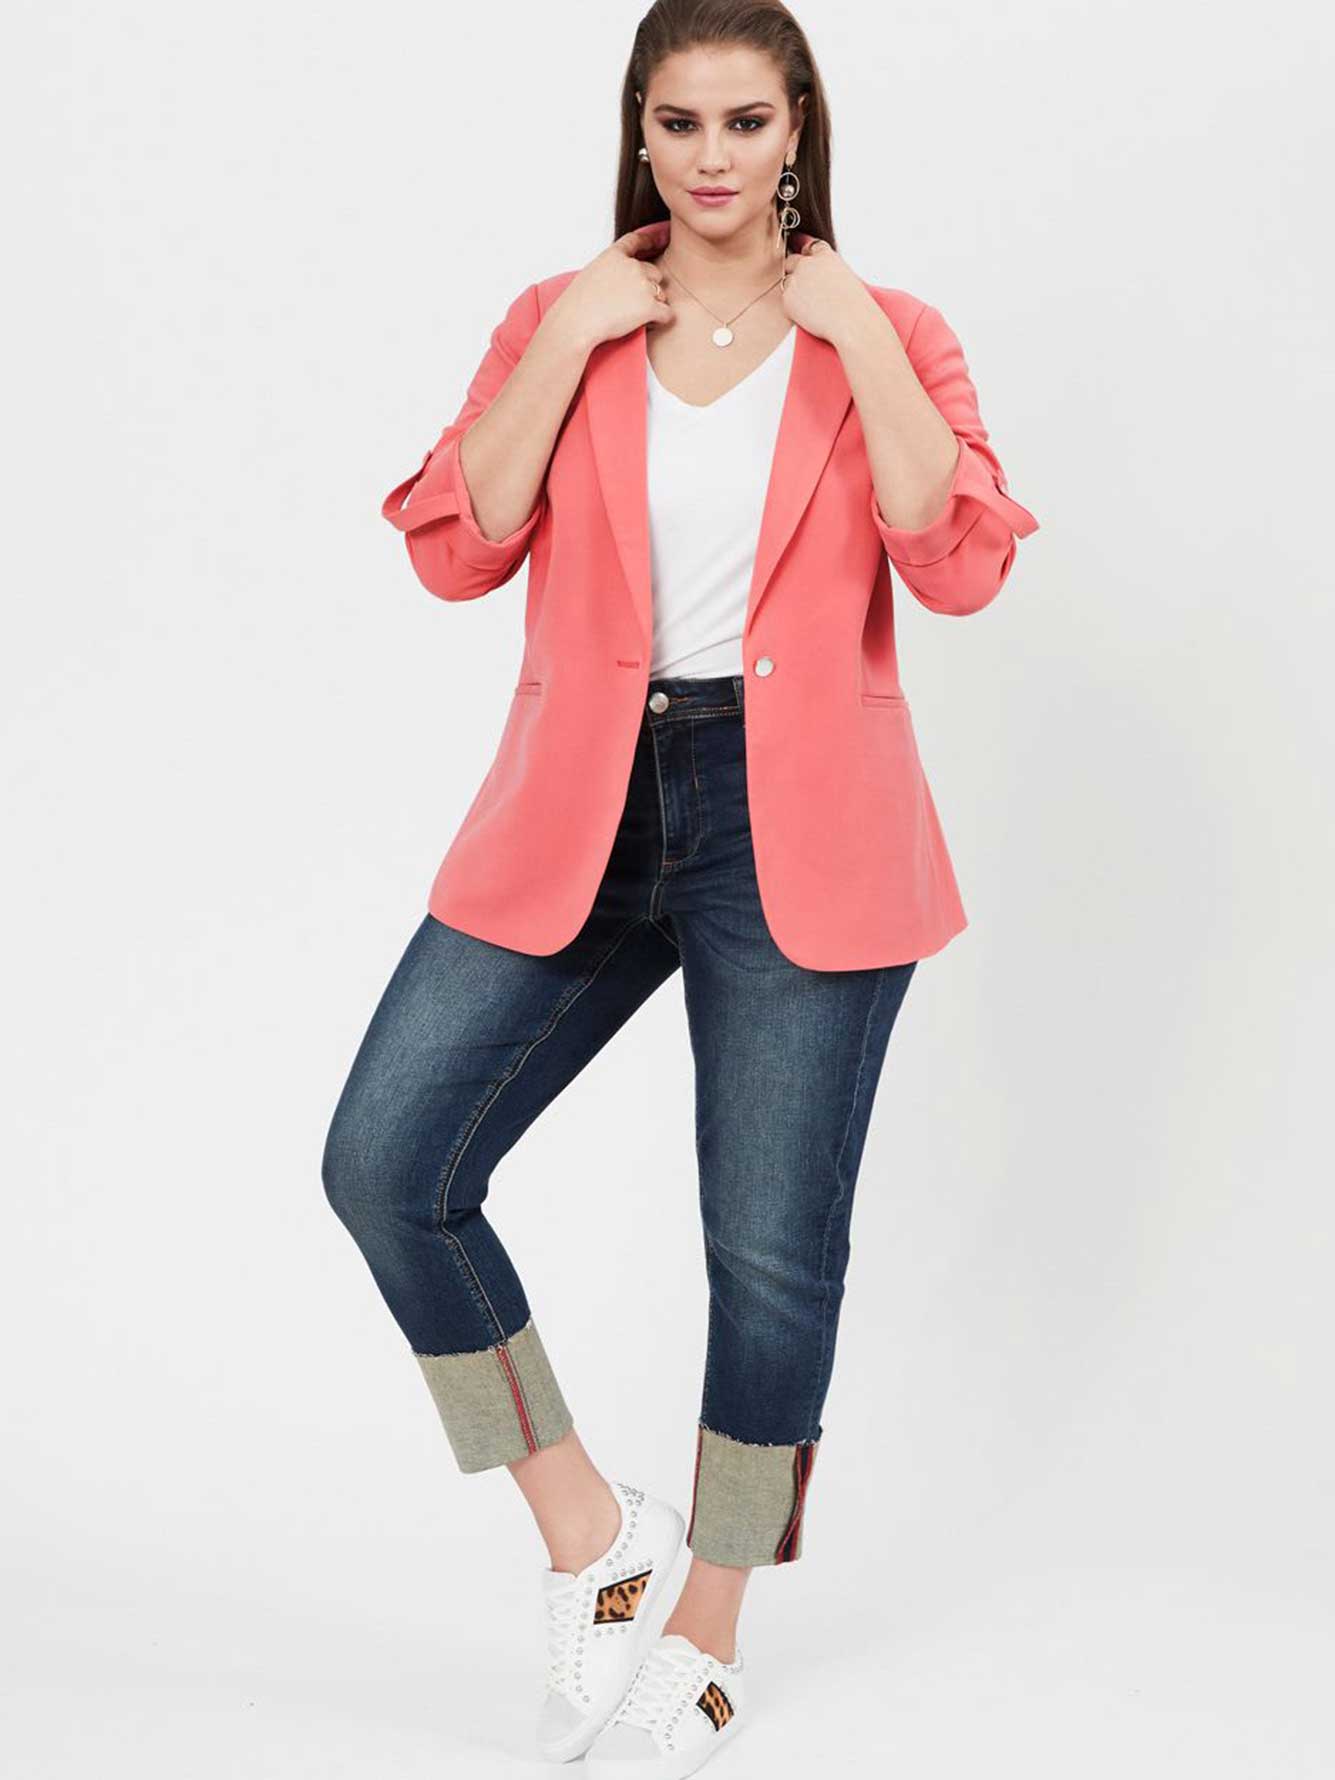 Womens blazer rolled up sleeves